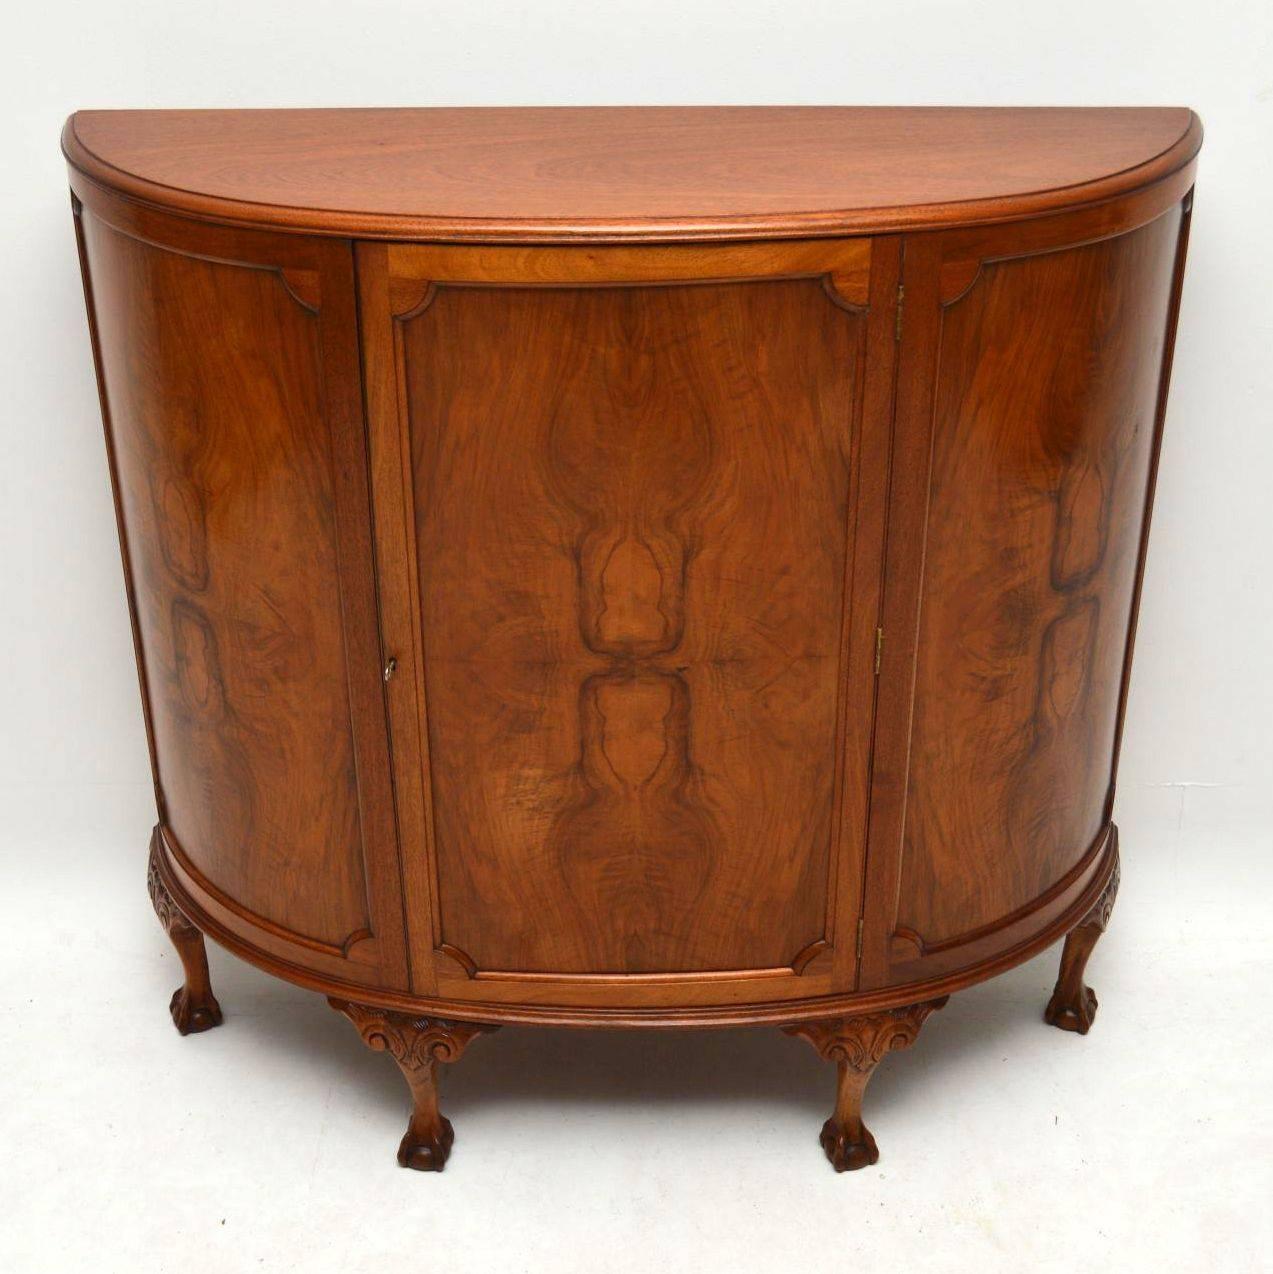 This antique bow fronted walnut cabinet is a very practicable piece of furniture, because it doesn't come out very far from the wall & has a lot of storage inside. It has three figured or burr walnut panels on the front & the centre one is a door